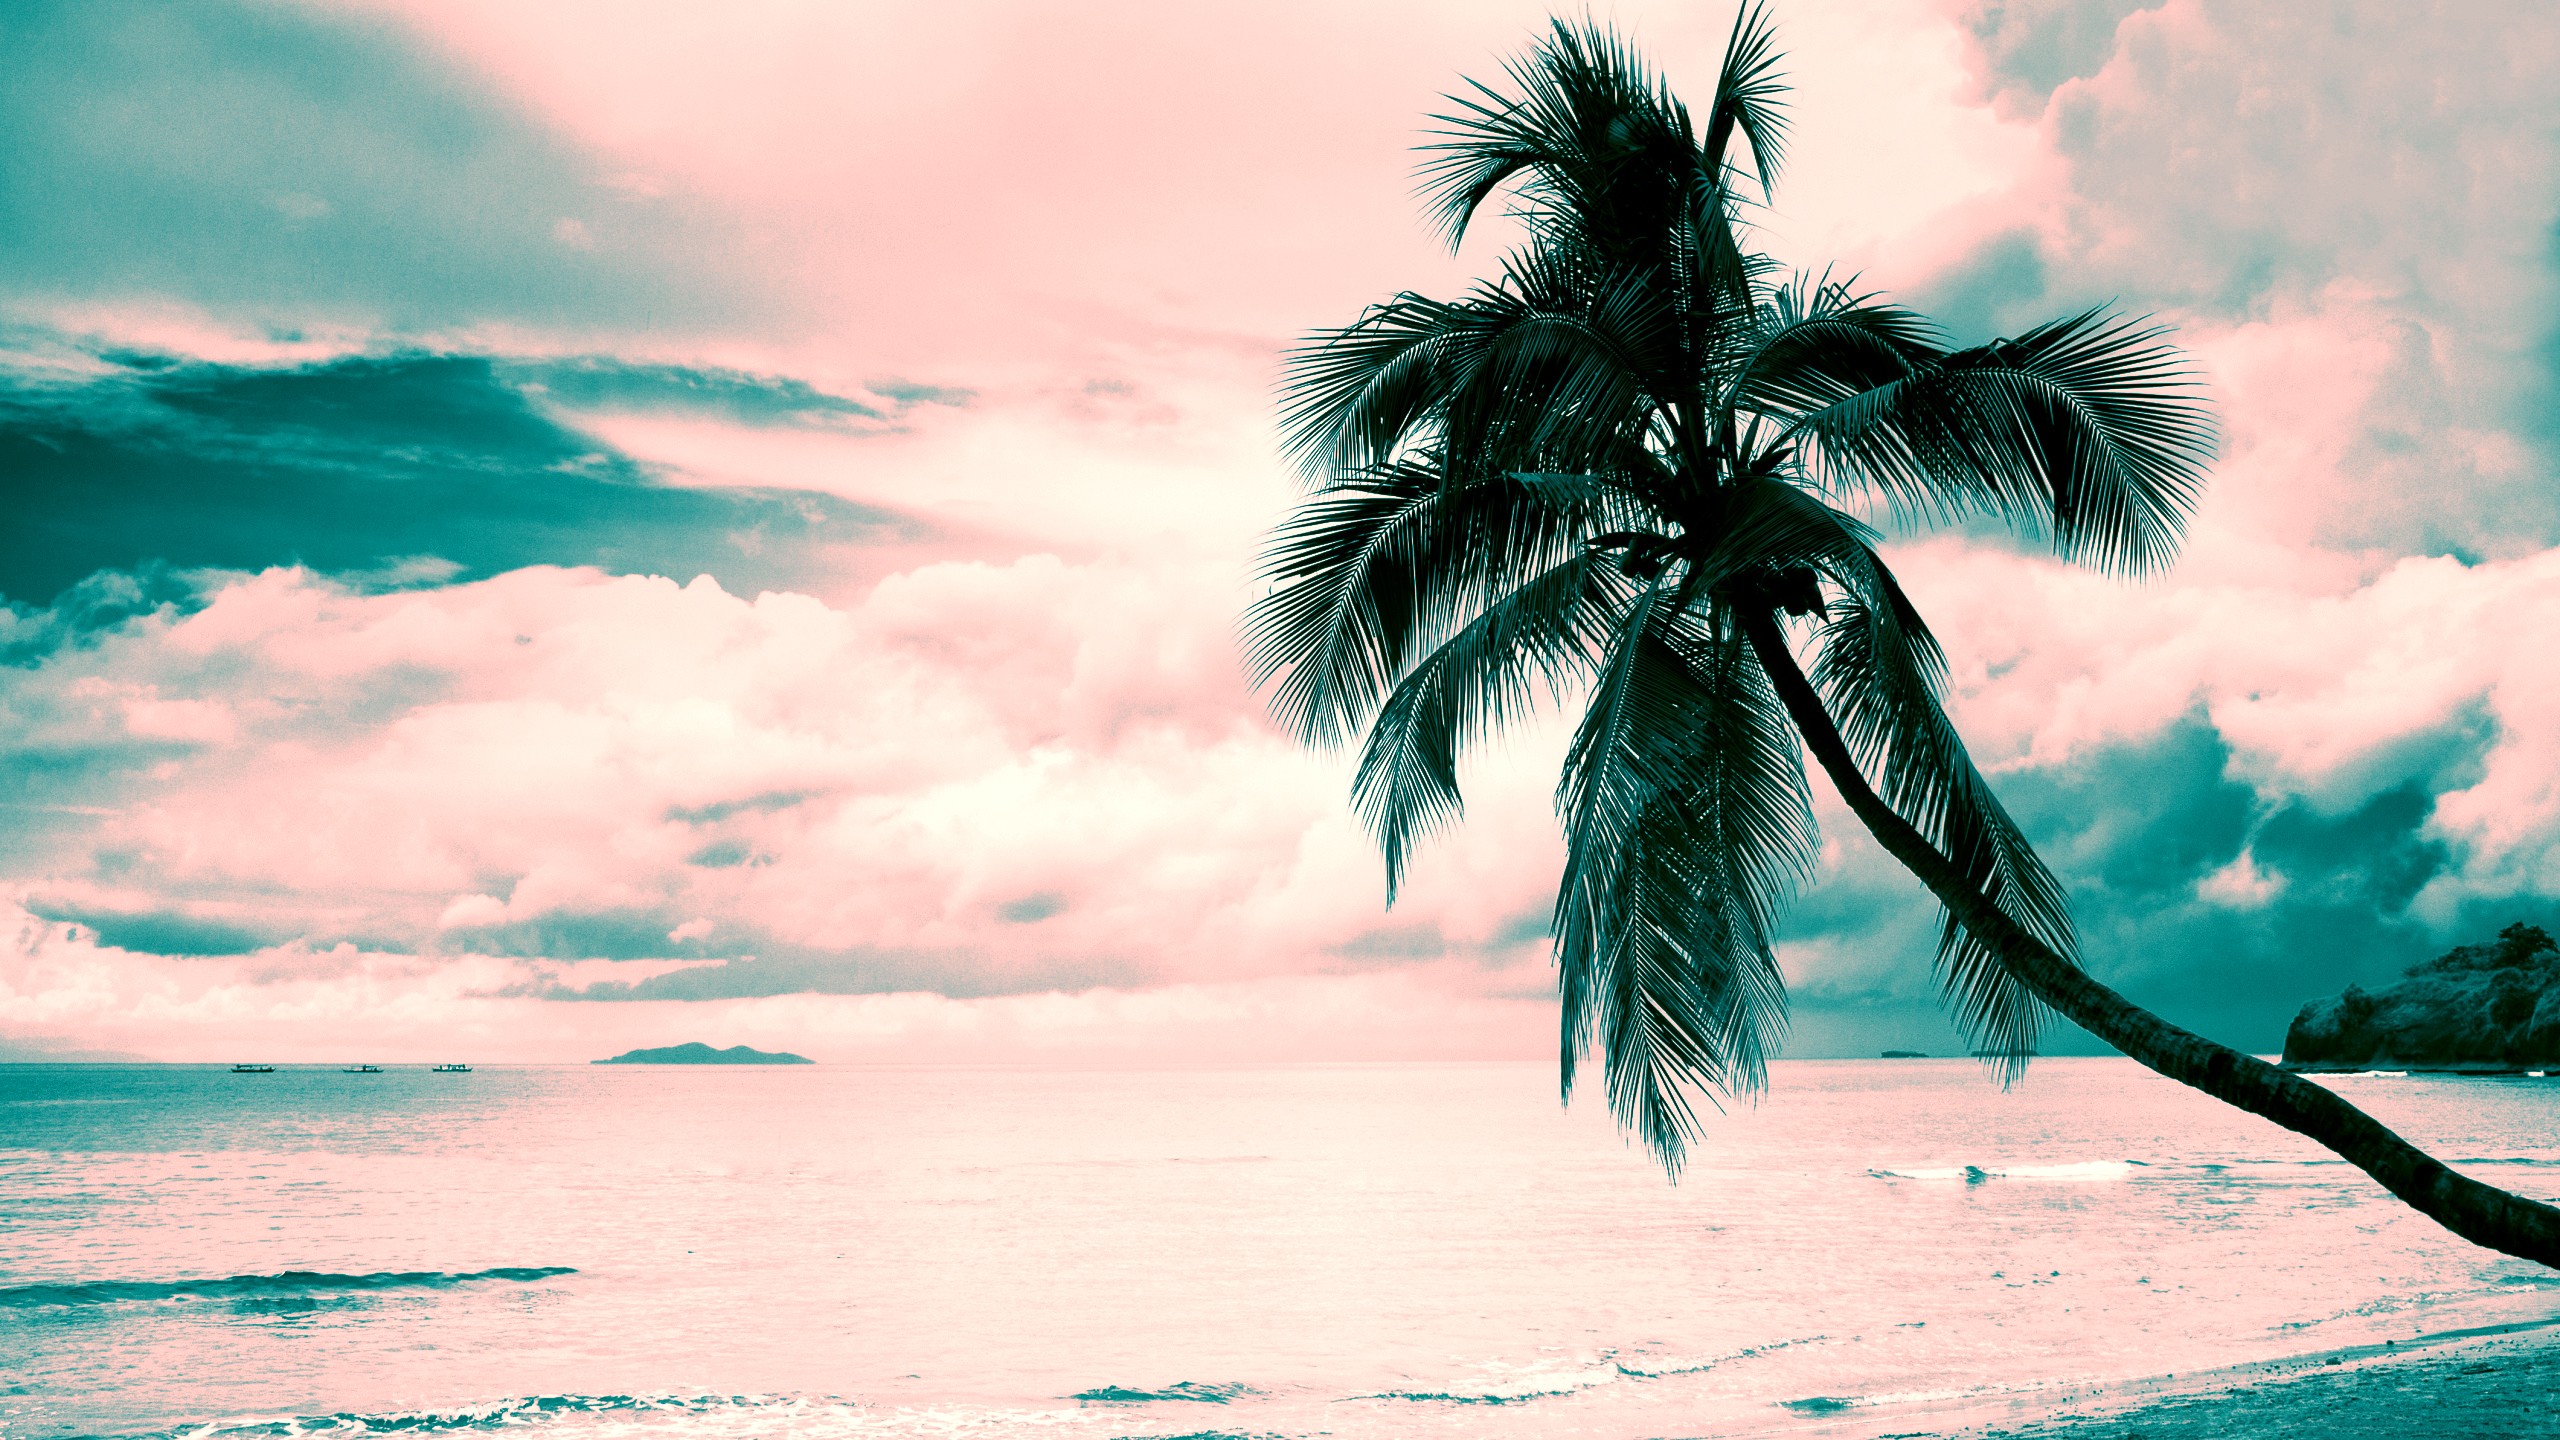 Beach Pink Turquoise Clouds Pink Clouds 2560x1440